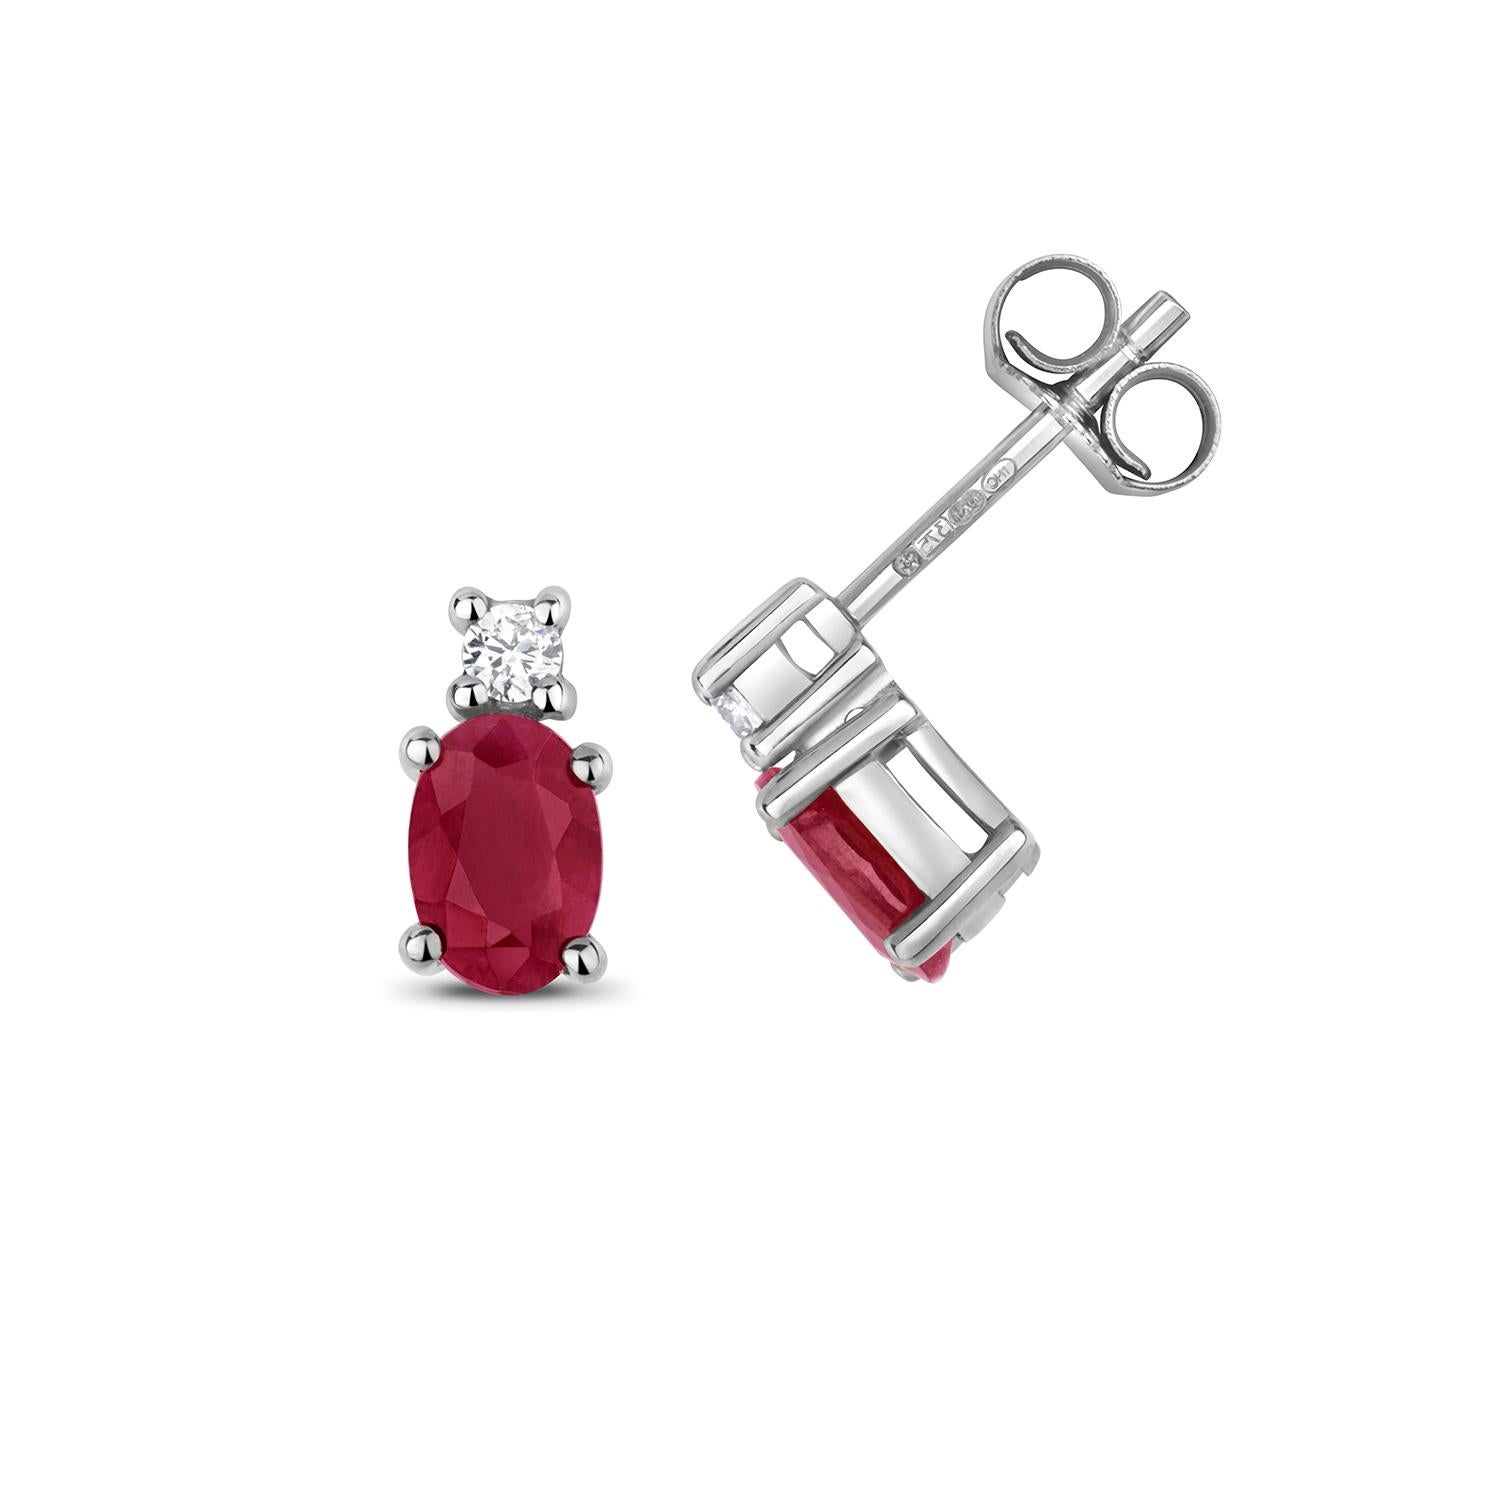 DIAMOND AND RUBY OVAL STUDS

9CT W/G OV/6X4 RUB

Weight: 1.1g

Number Of Stones:2

Total Carates:1.000